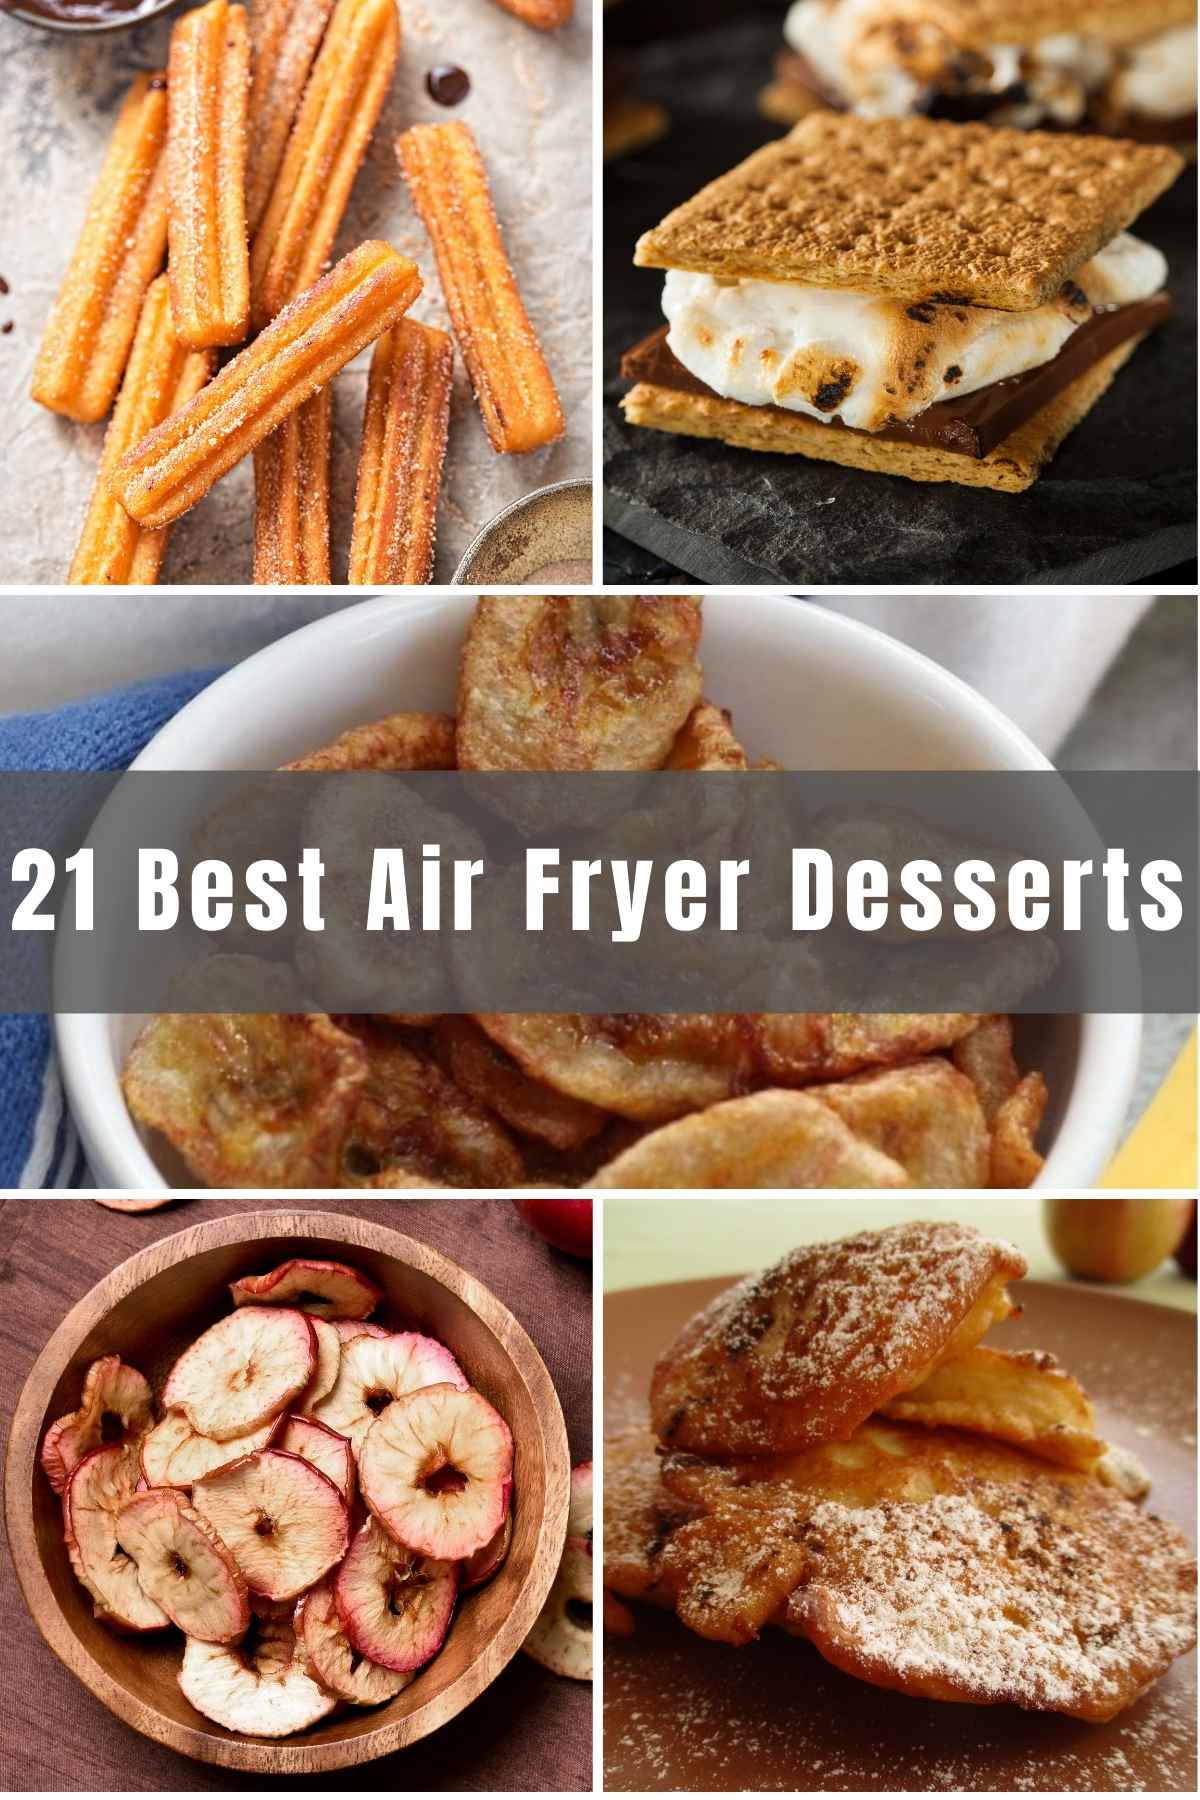 The beauty of an air fryer lies in its versatility. You can make anything in it, yes, even desserts! We’ve put together 21 of the best Air Fryer Desserts, all of which you can try from the comfort of your home!